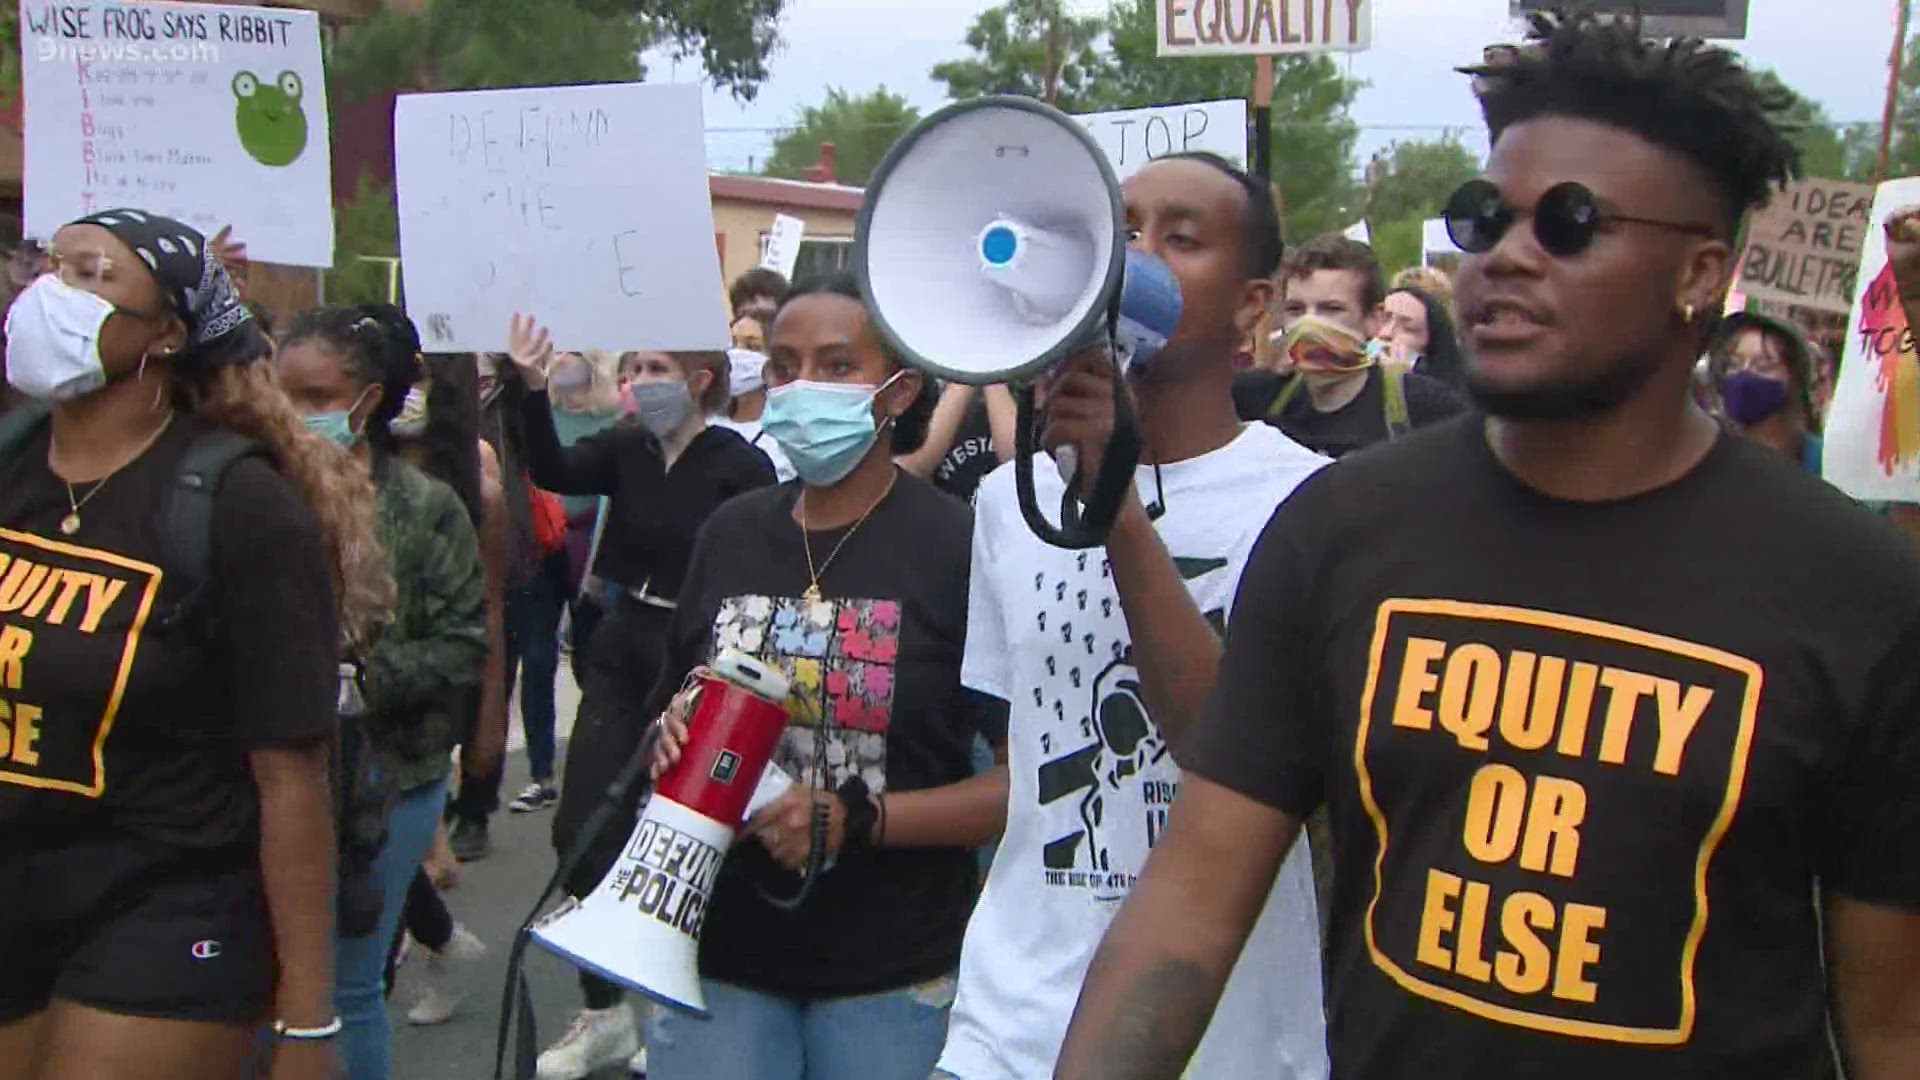 The march went through Denver neighborhoods before ending at Manual High School.